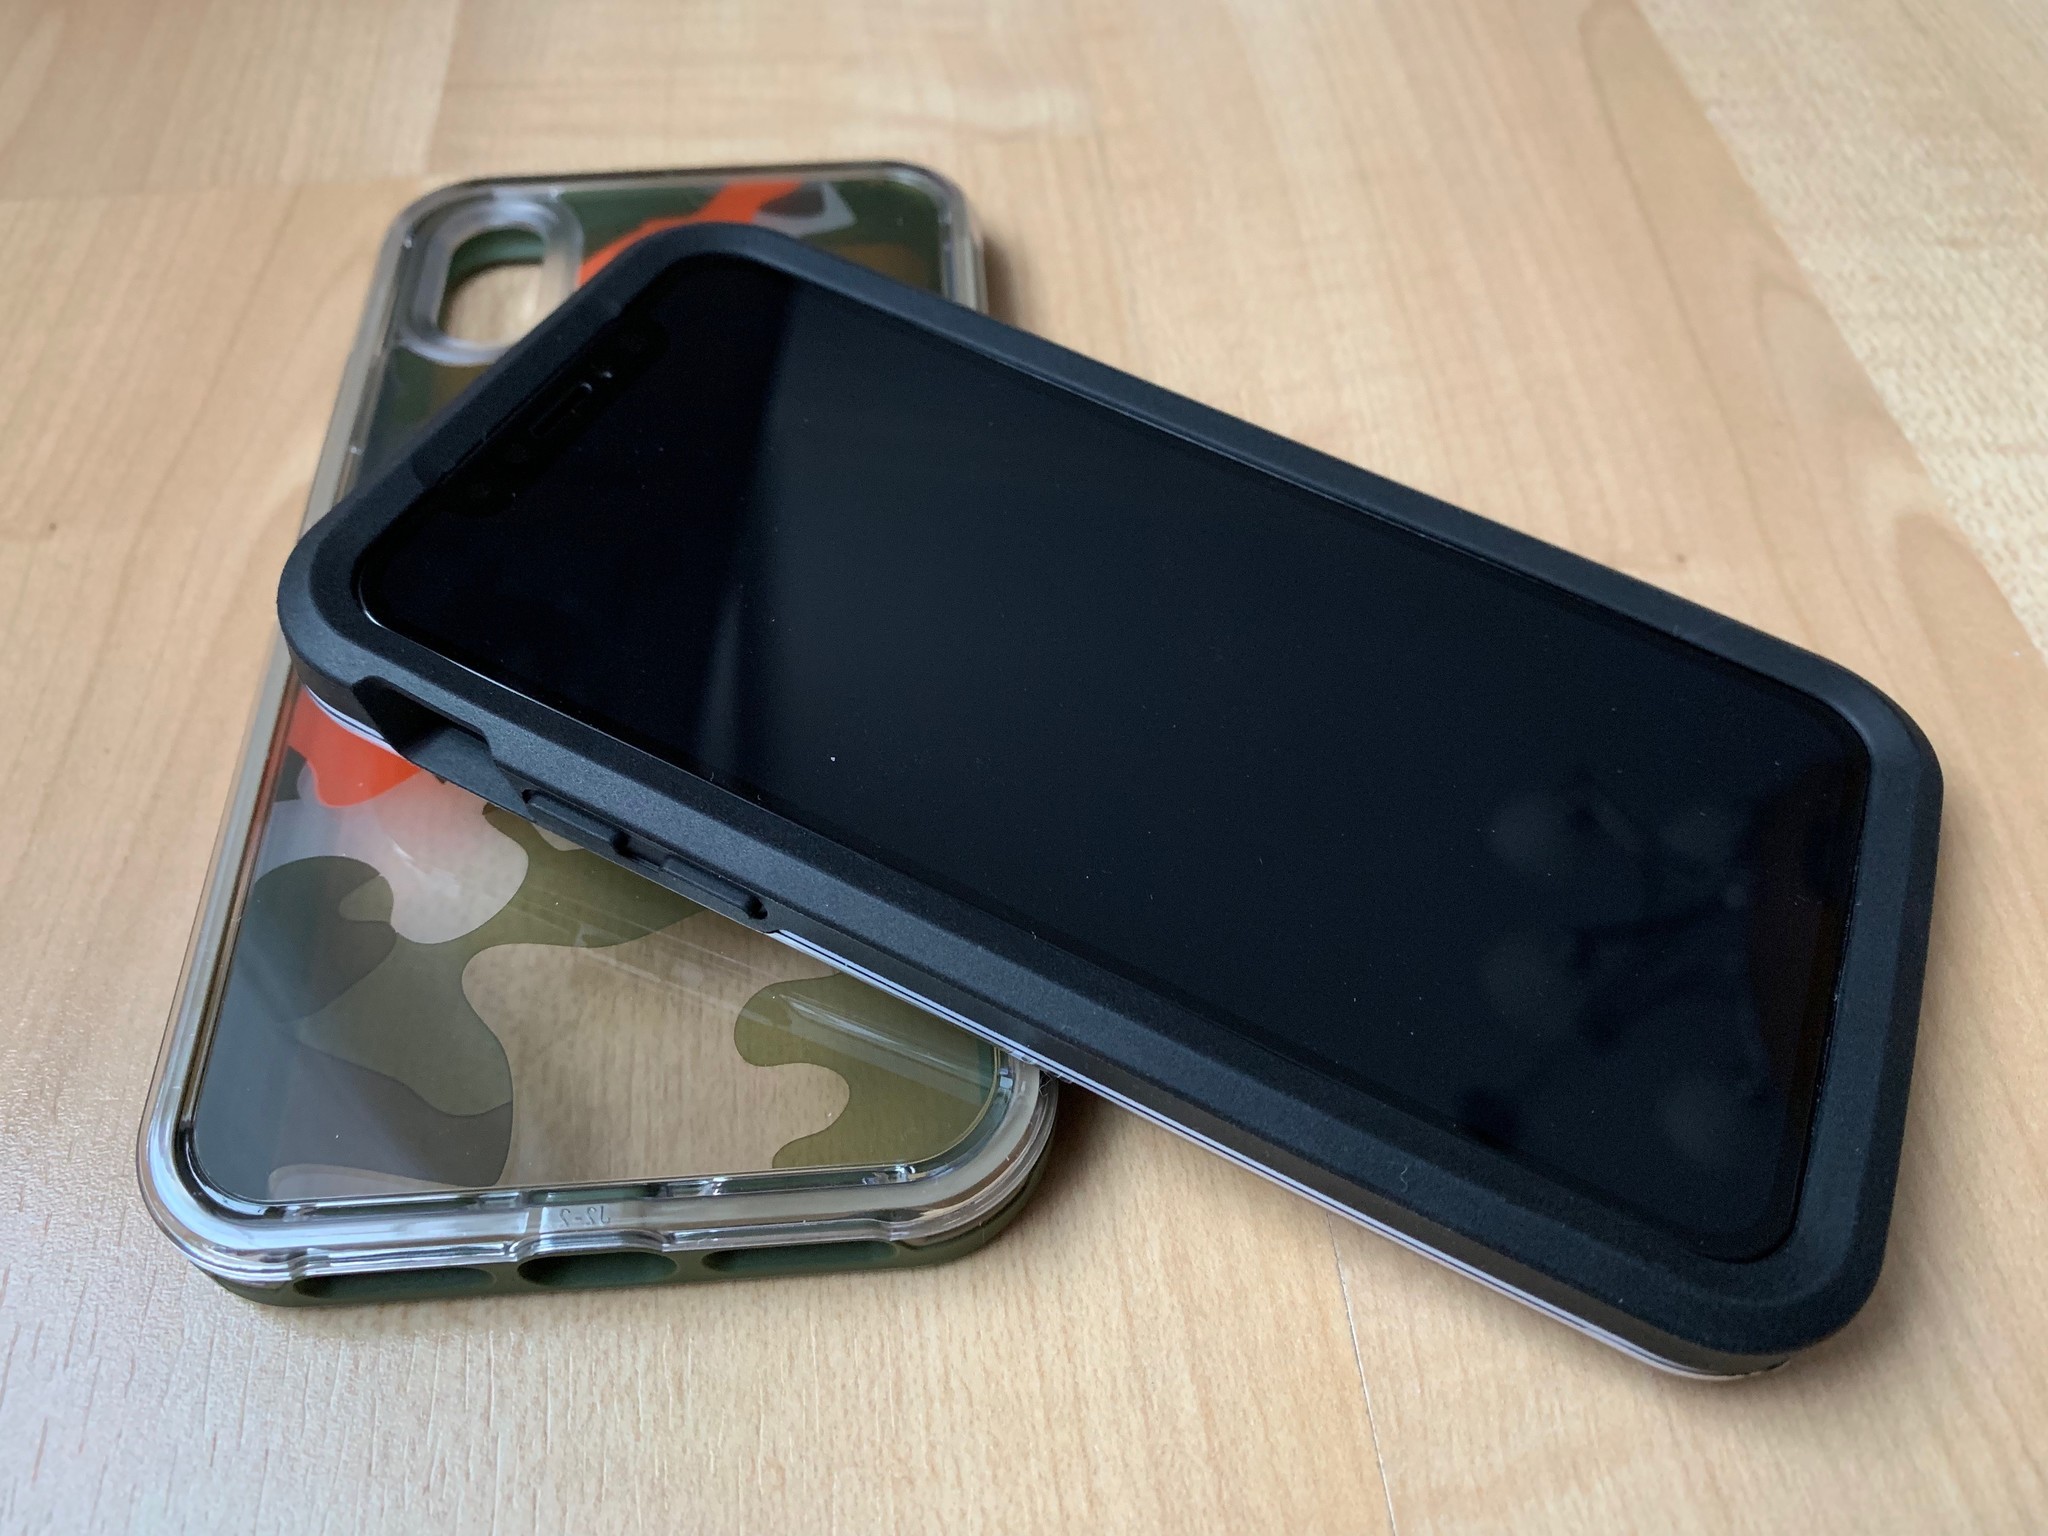 LifeProof Slam iPhone Case review: Protection without major bulk | iMore